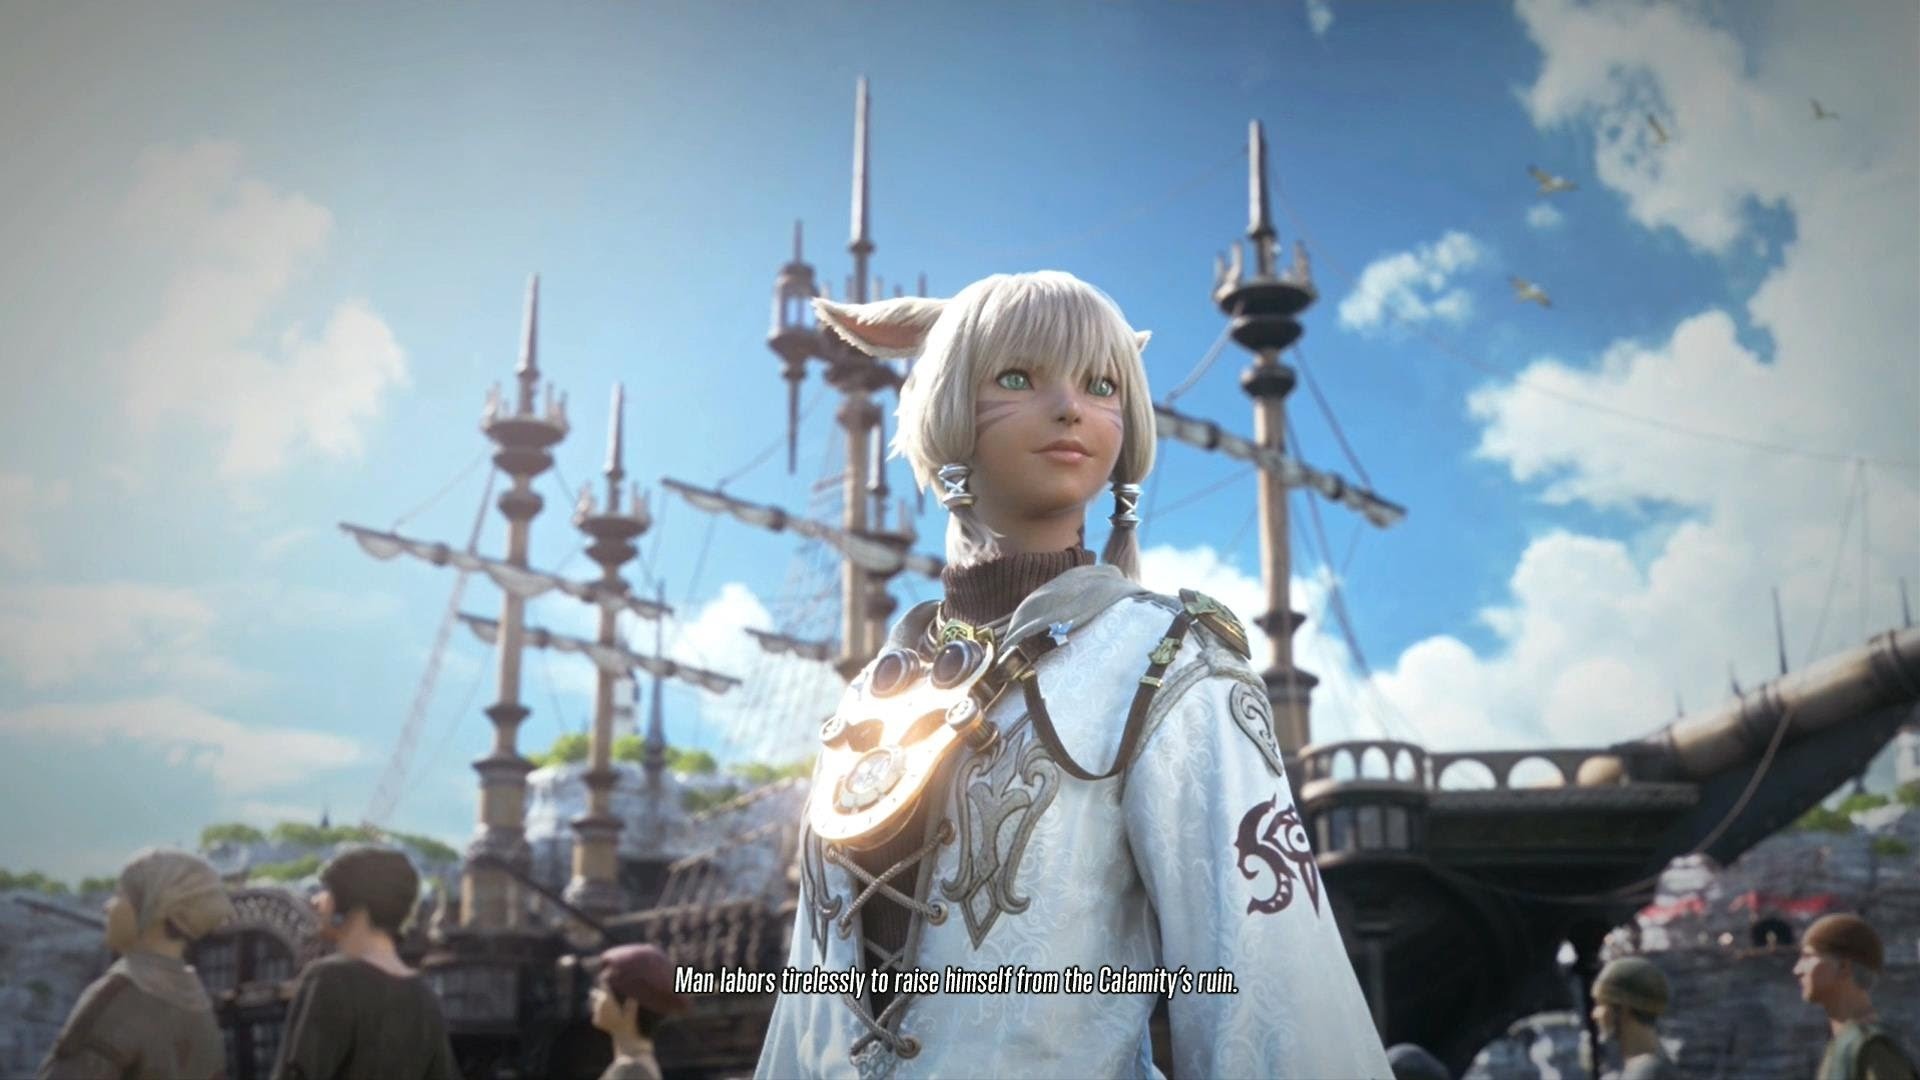 1920x1080 Final Fantasy XIV: A Realm Reborn - PS4 Beta - 30 Minutes of Gameplay (1080p)  - YouTube